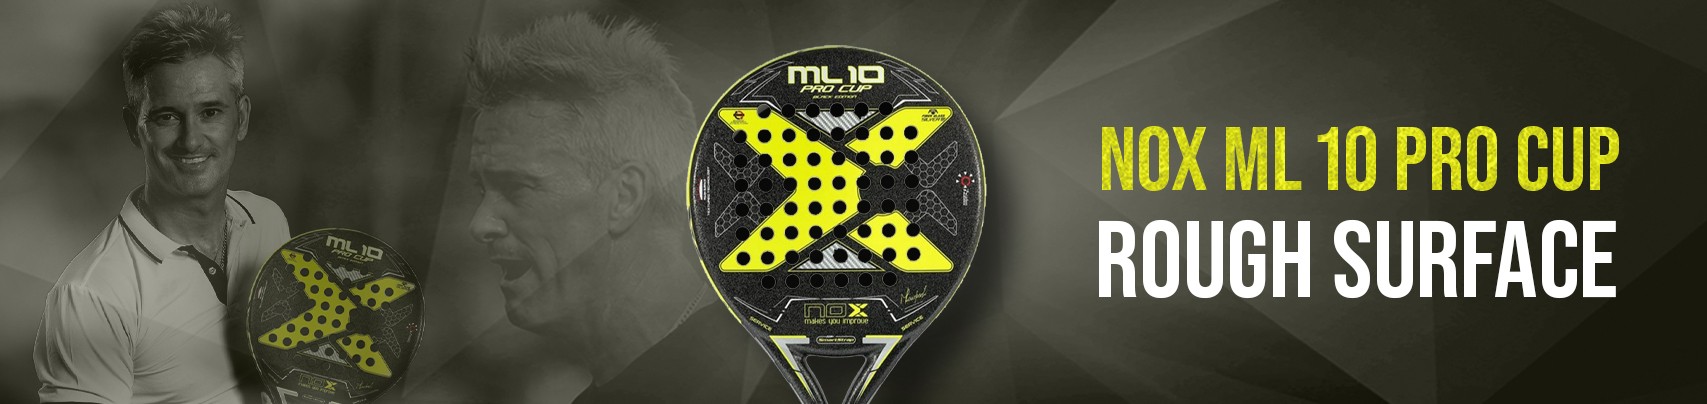 Review and opinion of the Nox ML10 Pro Cup Rough Surface 22 of Miguel Lamperti